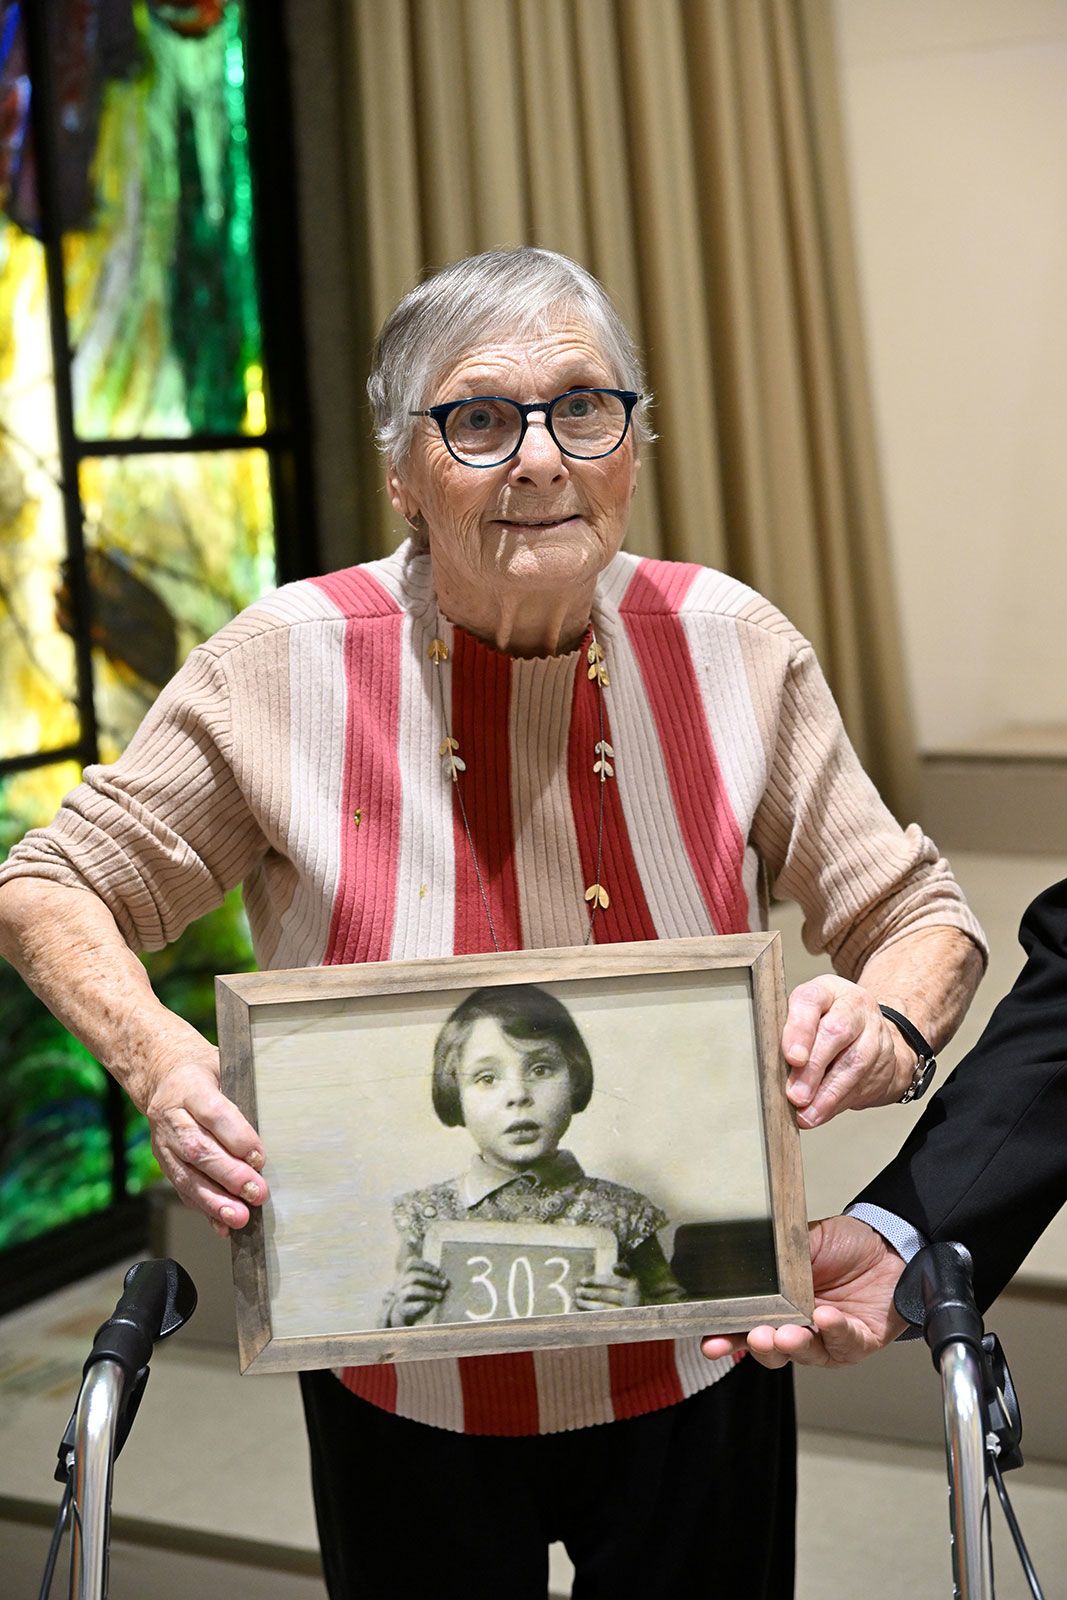 Holocaust and October 7 survivor Mirjam Beit Talmi Szpiro holding a photo of herself as a 3-year-old in Amsterdam, 1939, on the way to Britain.